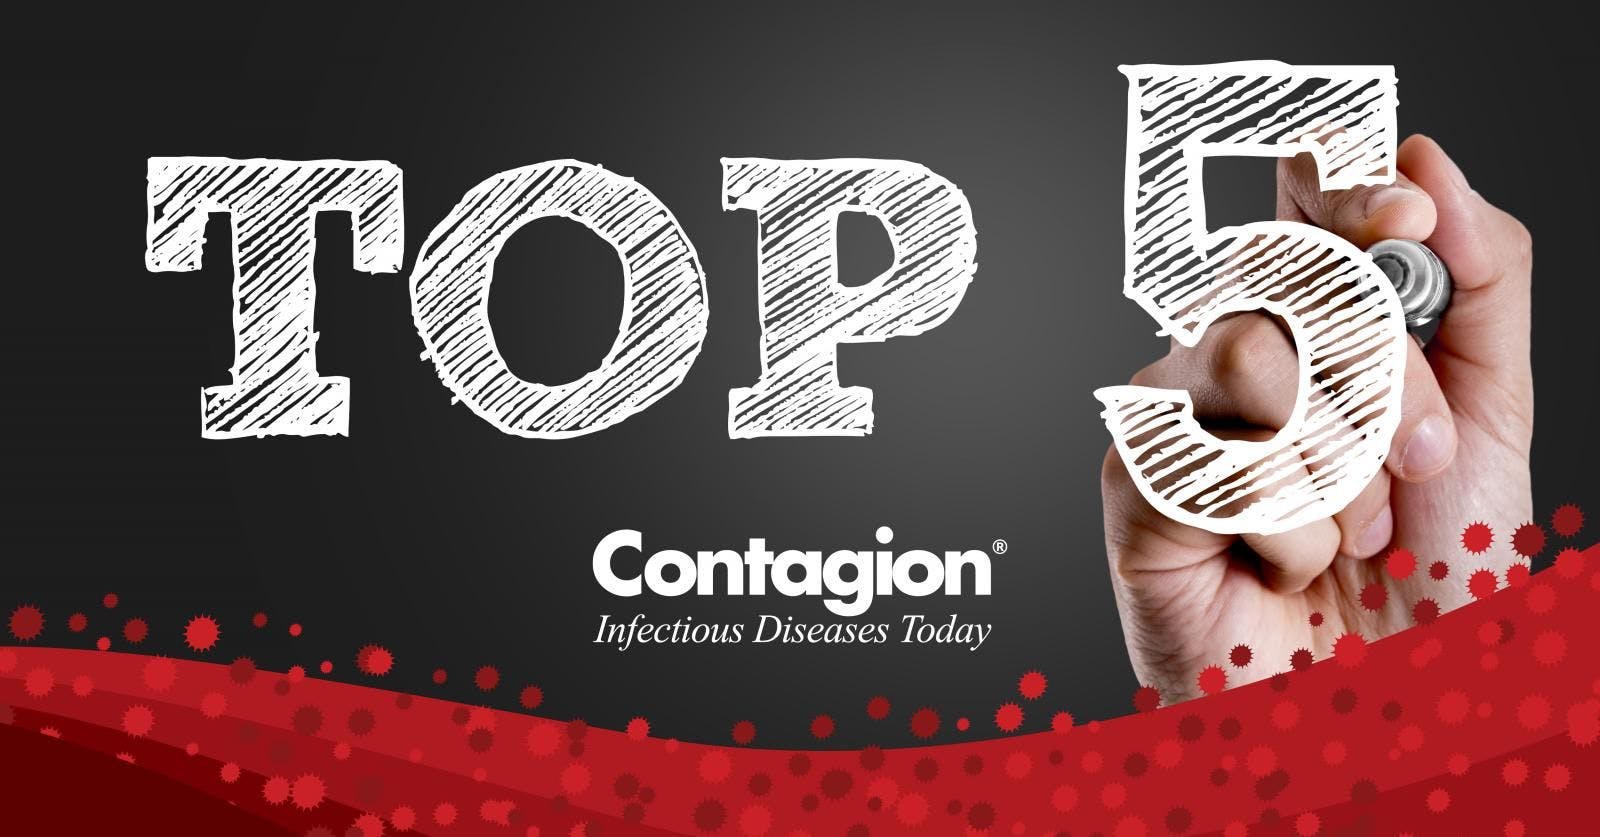 Top Infectious Disease News of the Week&mdash;January 19, 2020